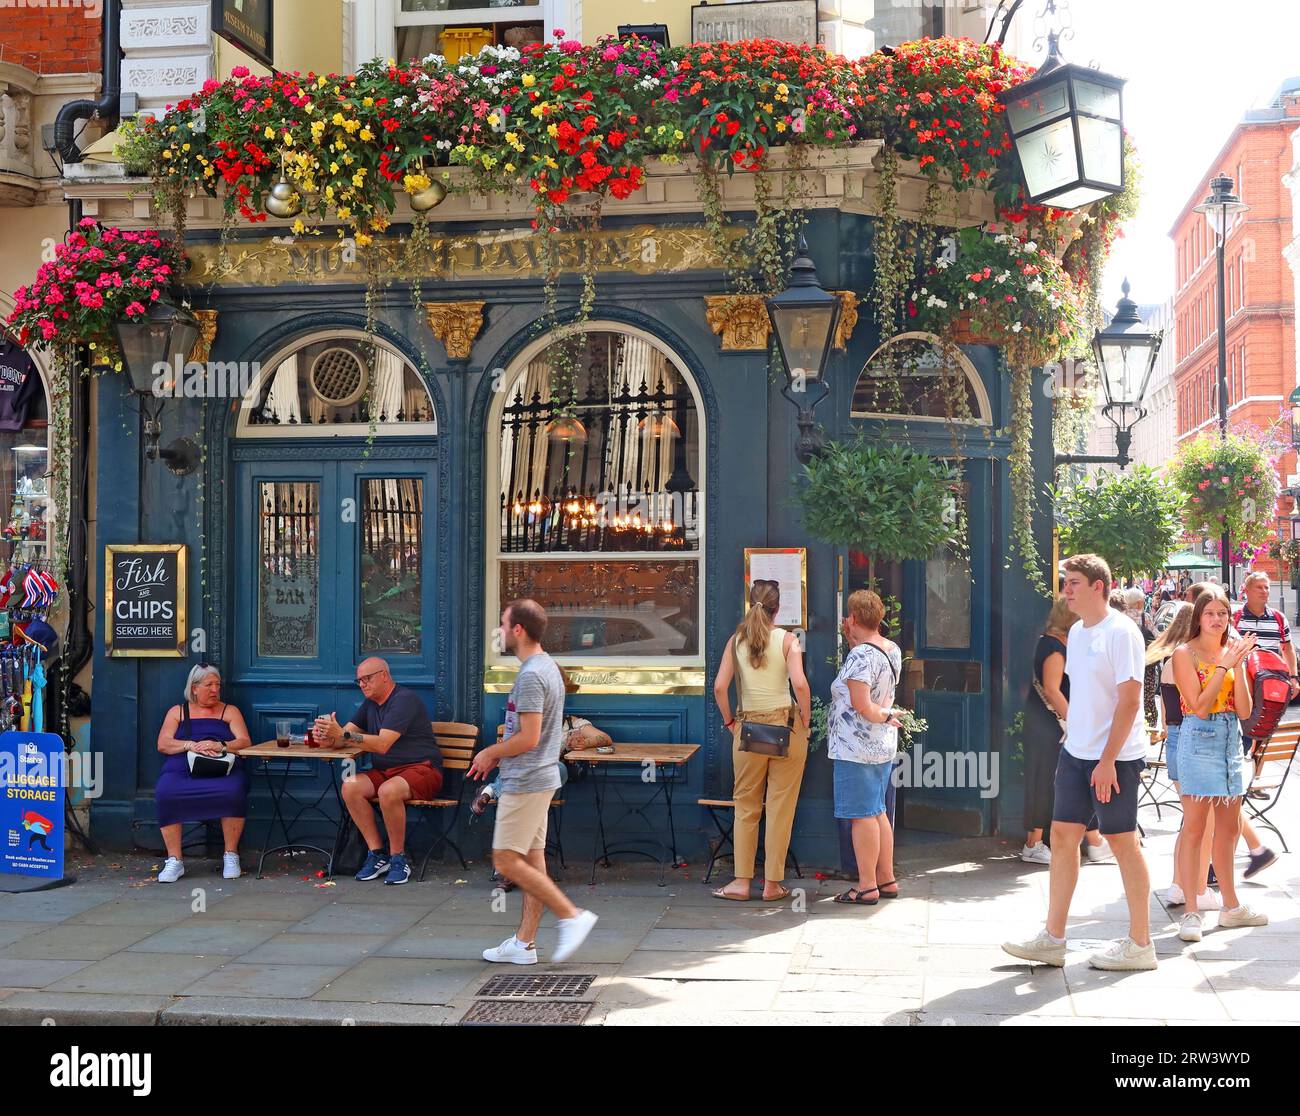 The Museum Tavern, 49 Great Russell St, Bloomsbury, Londres, Angleterre, Royaume-Uni, WC1B 3BA Banque D'Images